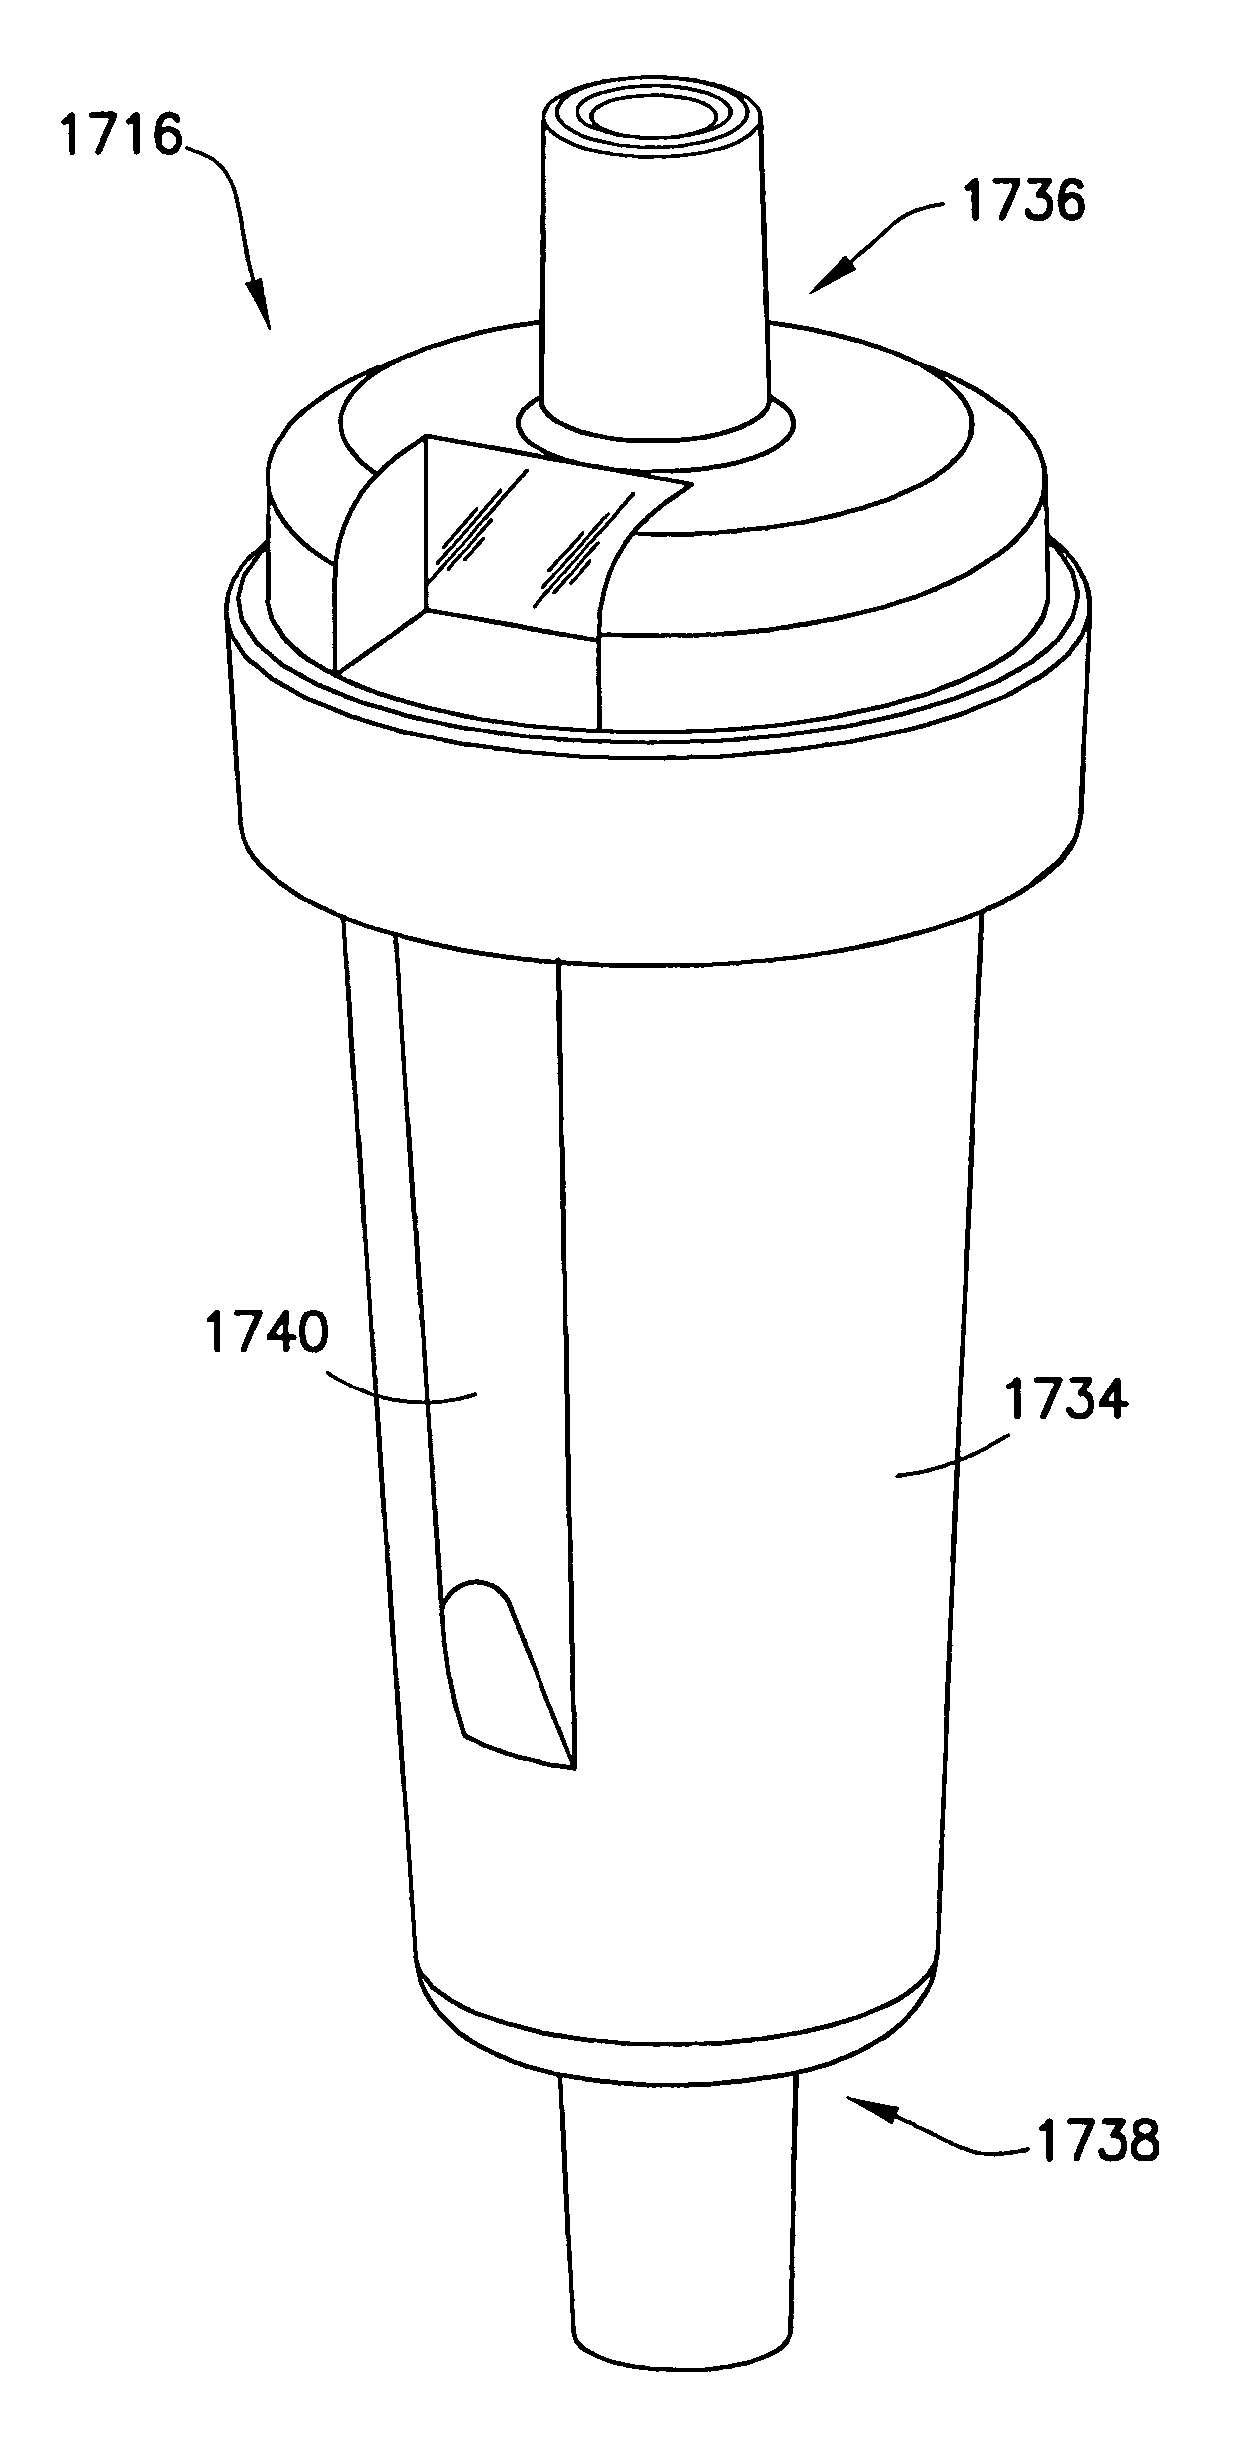 Fluid delivery system having a fluid level sensor and a fluid control device for isolating a patient from a pump device